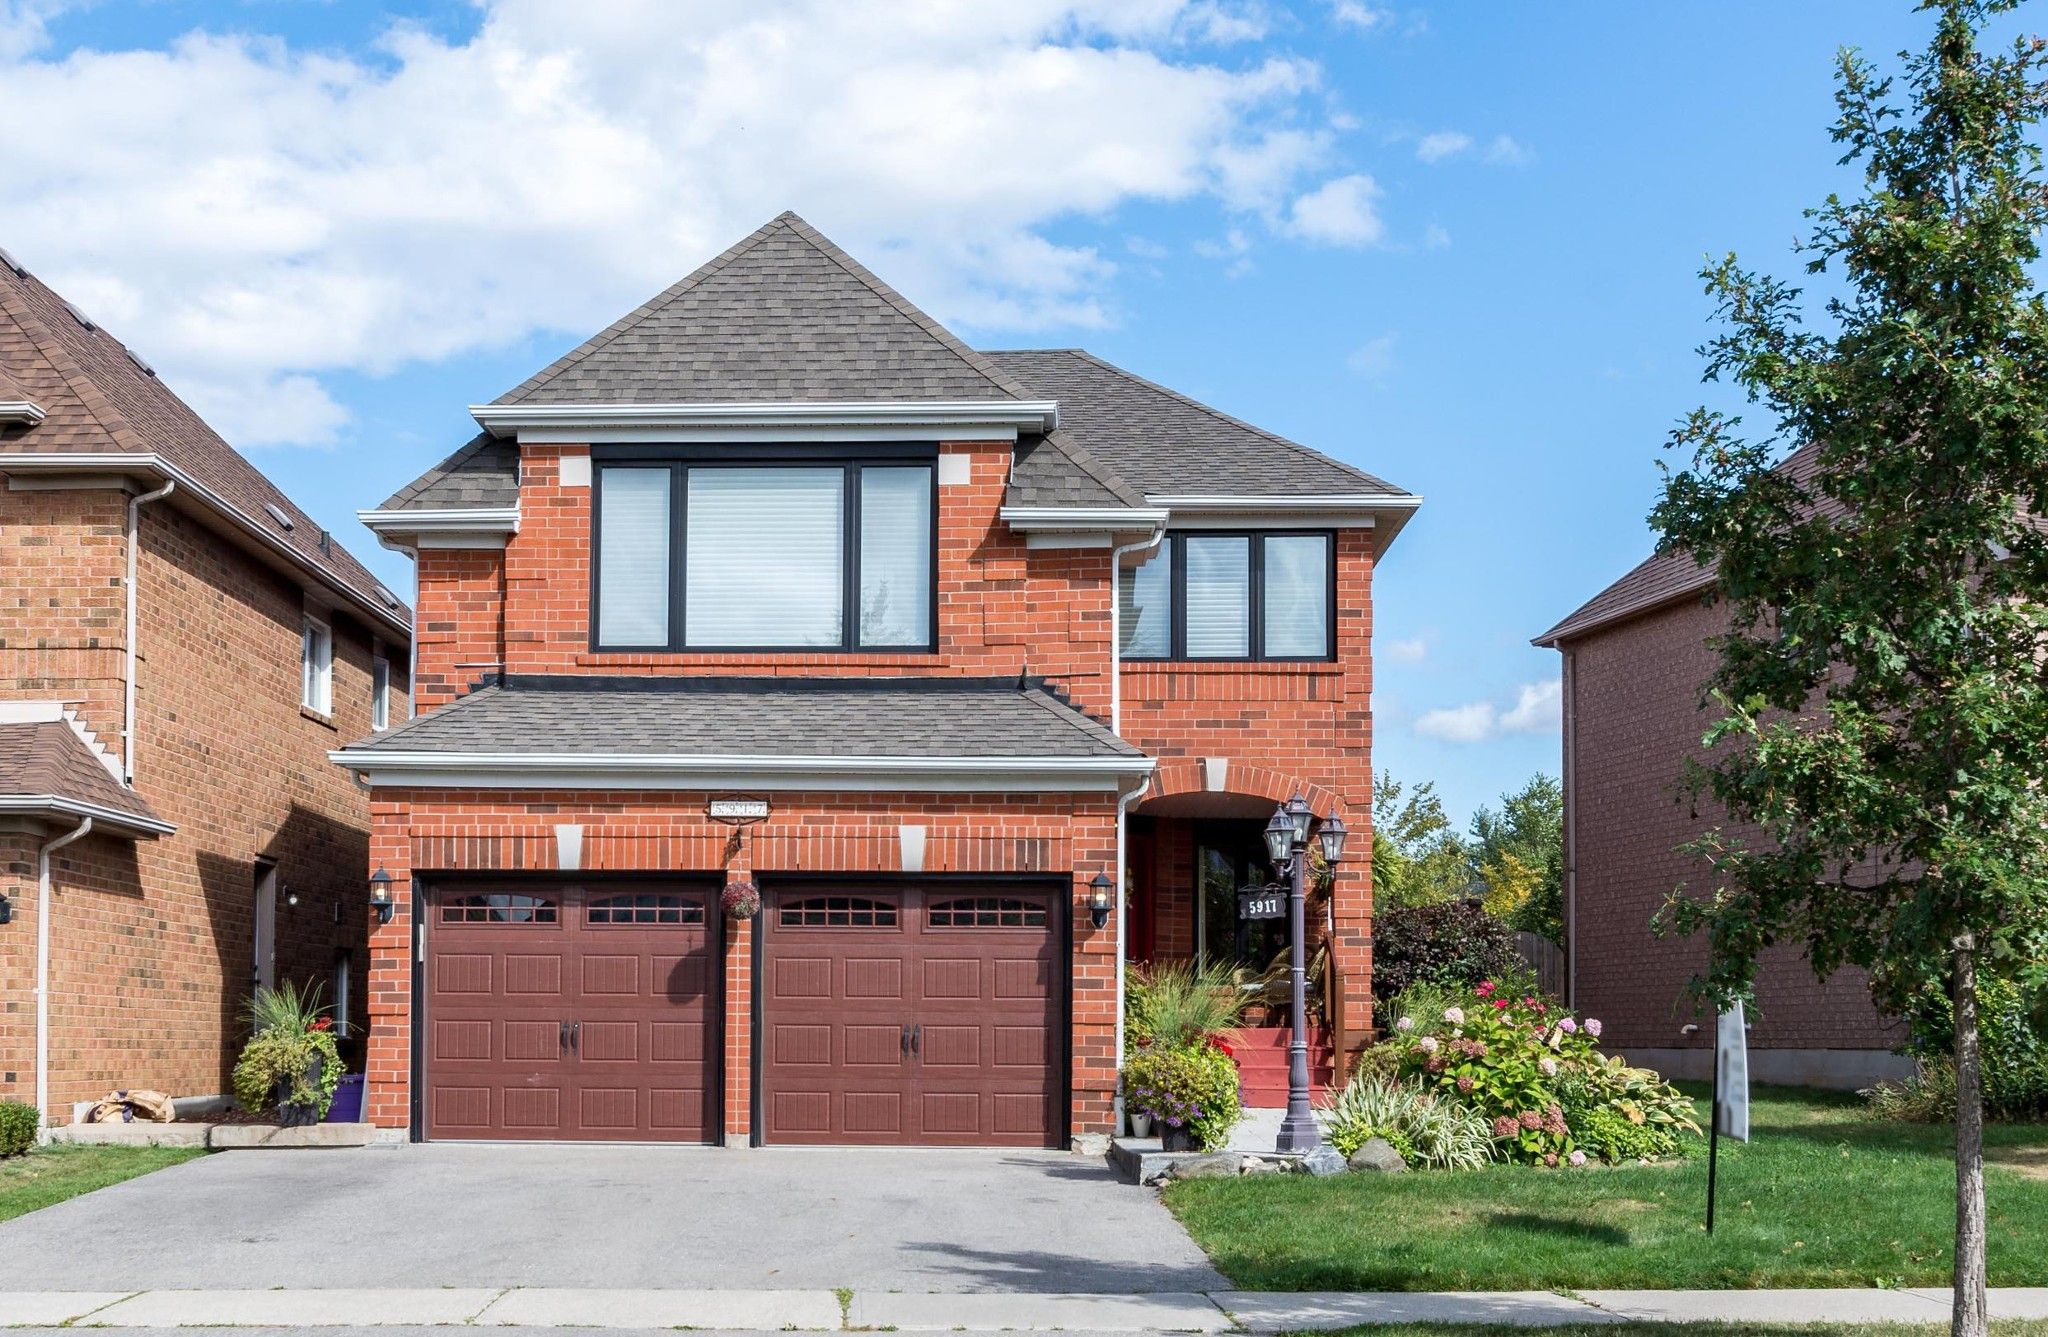 Main Photo: 5917 Greensboro Drive in Mississauga: Central Erin Mills House (2-Storey) for sale : MLS®# W4588271